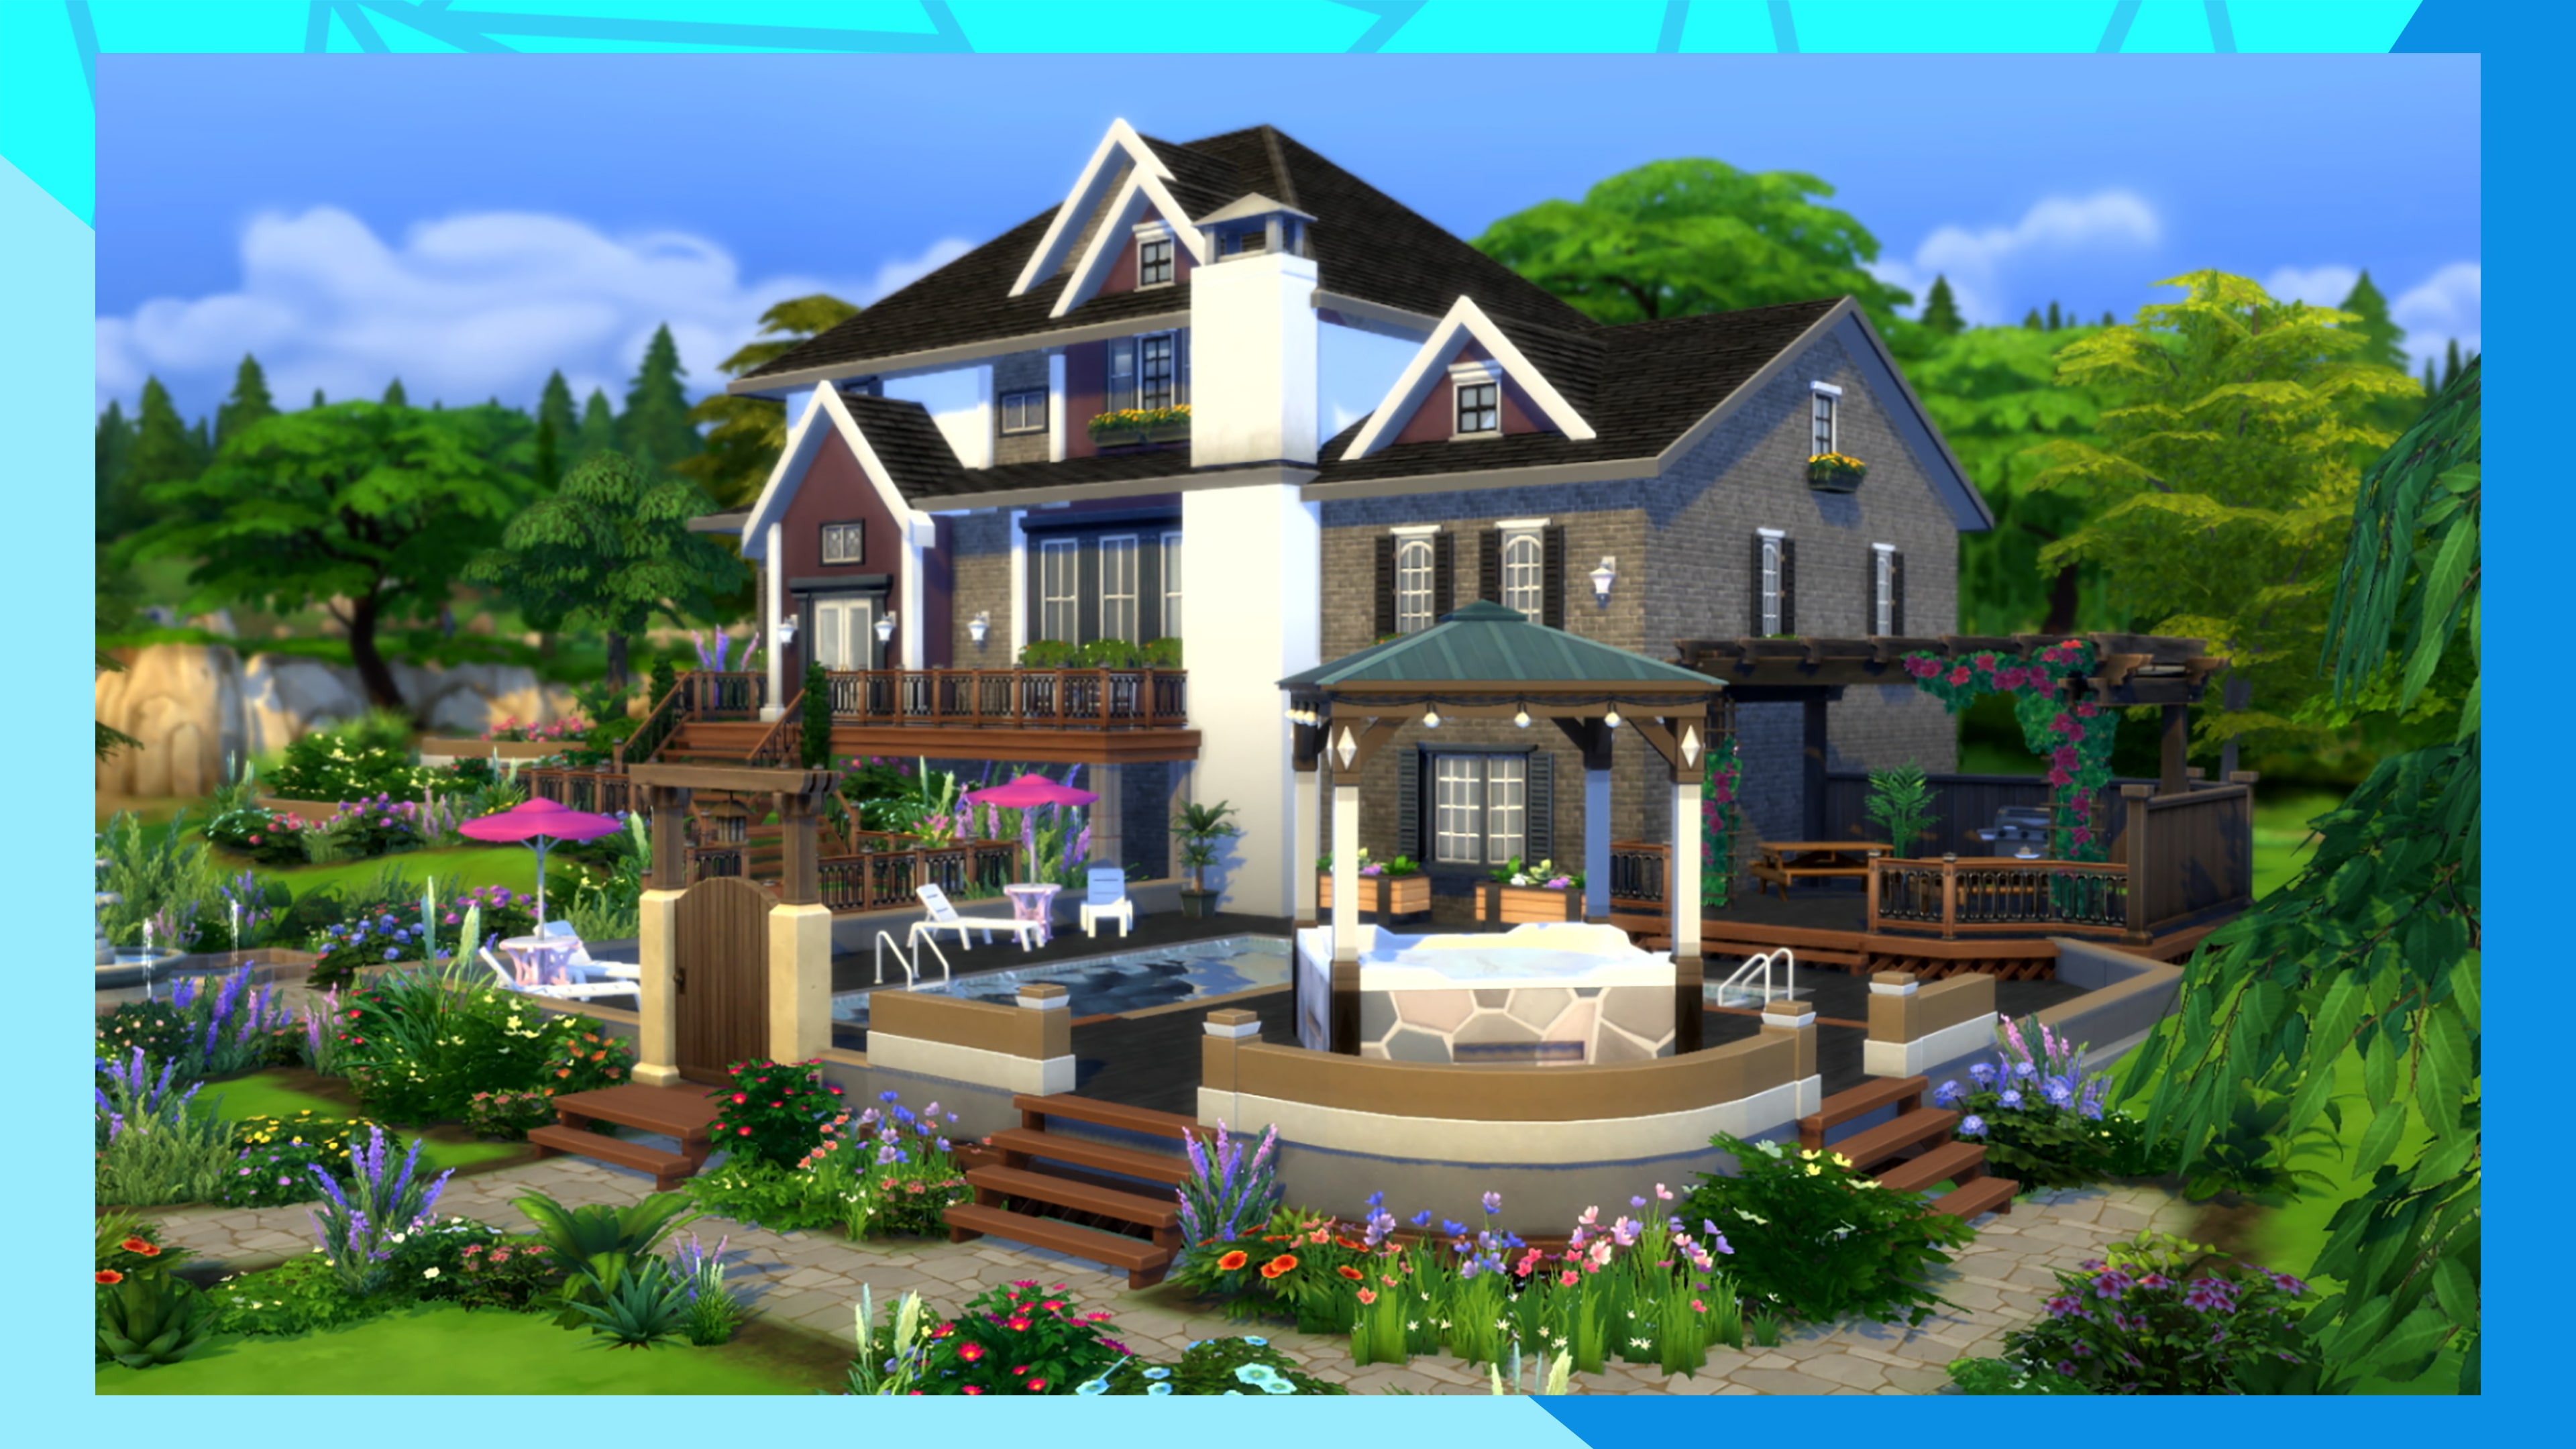 The Sims™ 4 Cottage Living